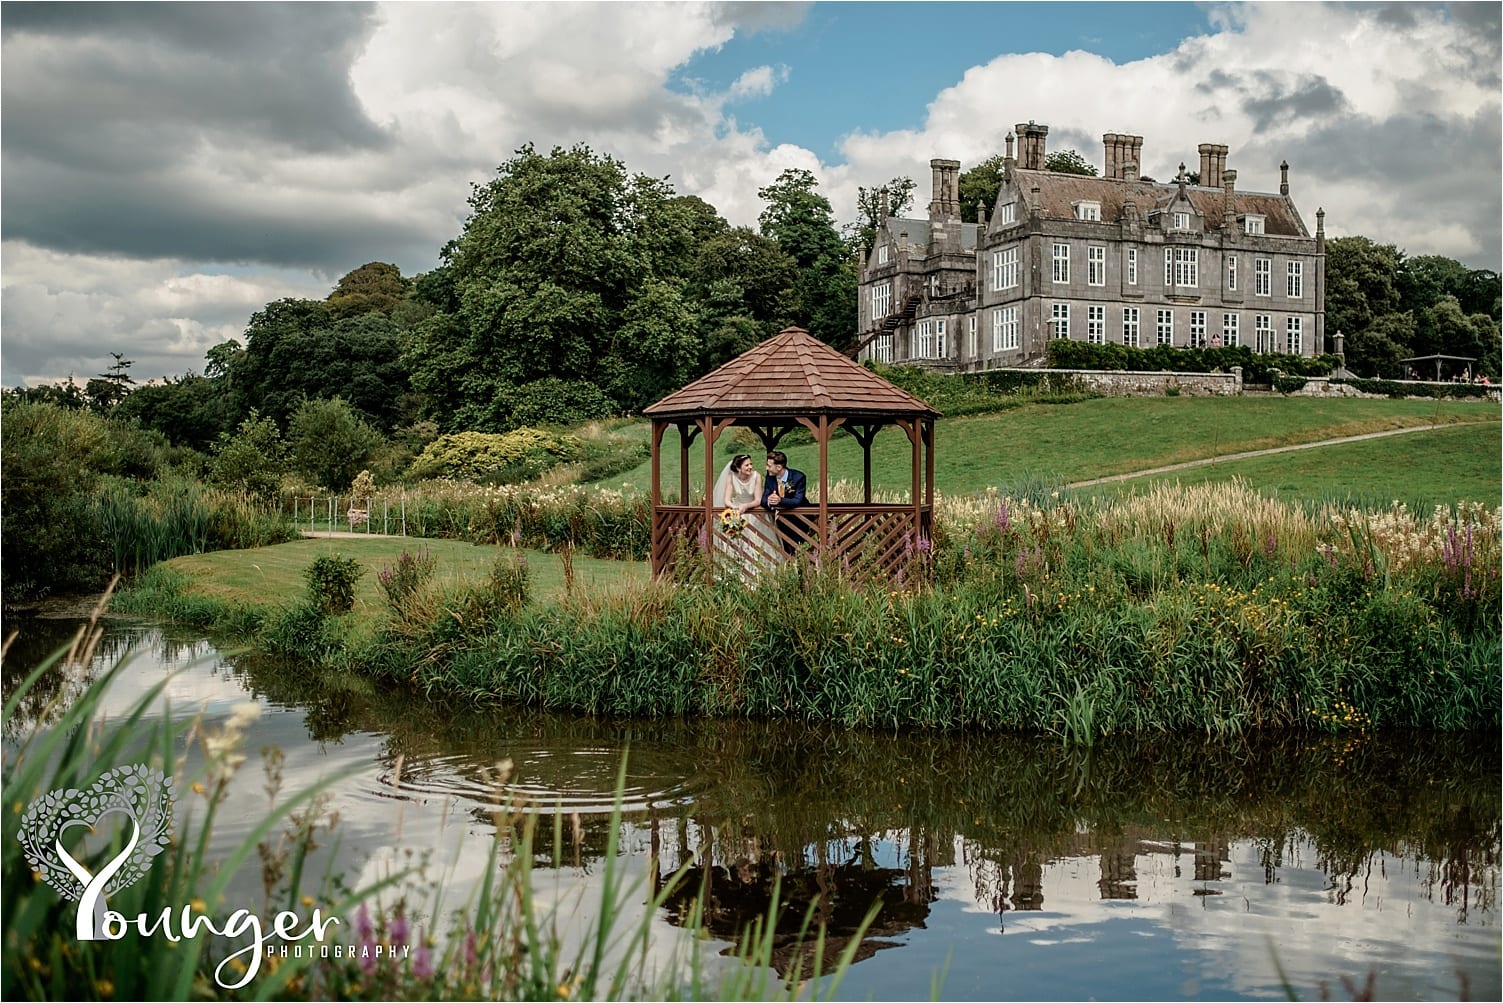 Kitley House wins wedding Venue Of the Year